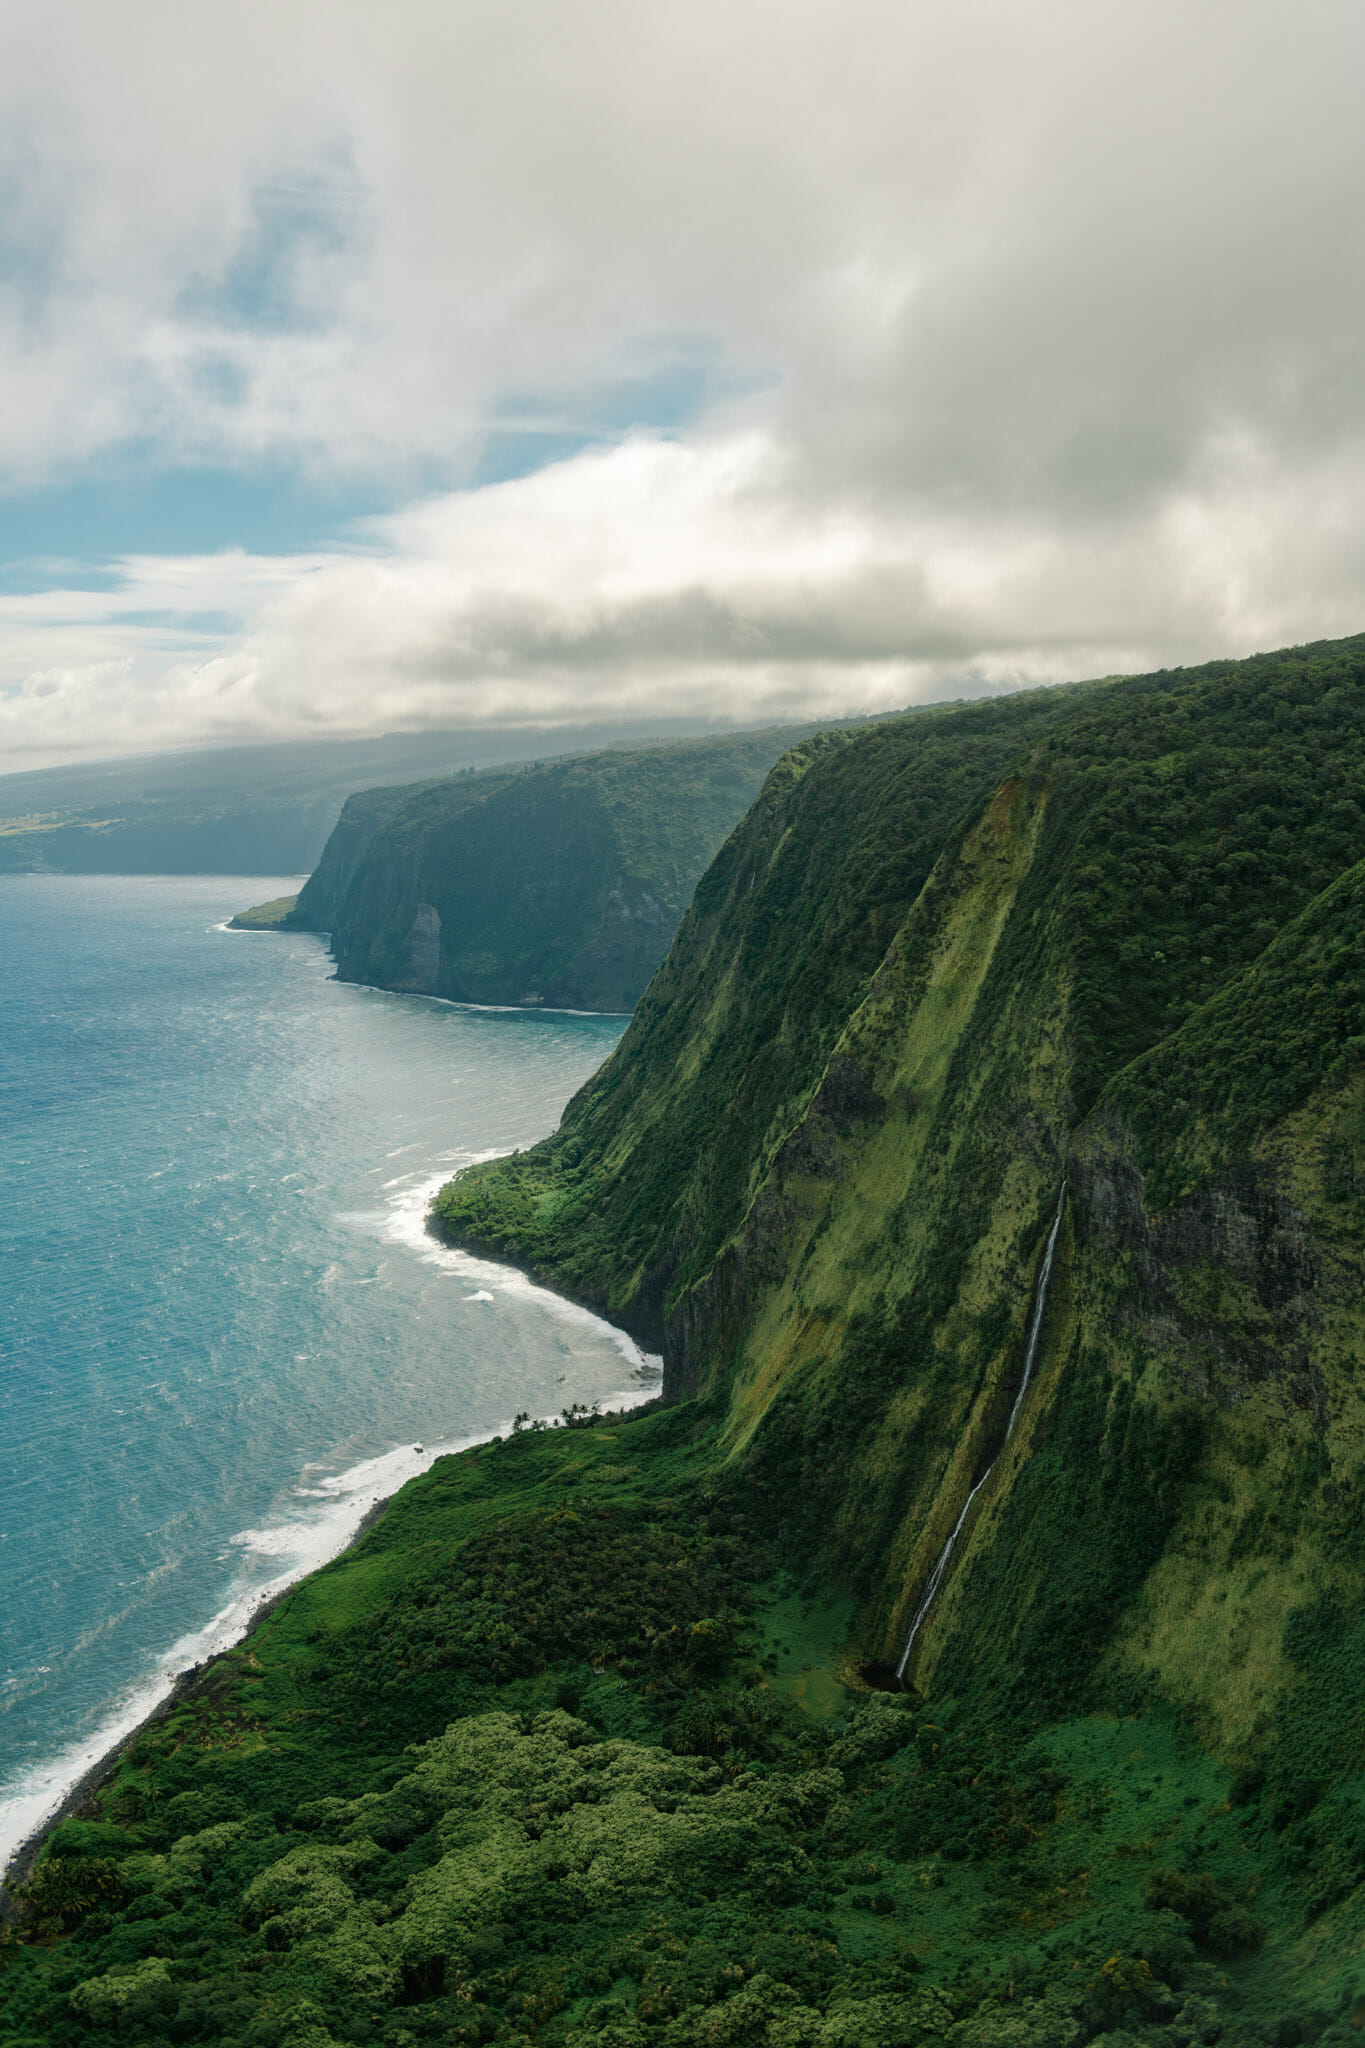 The coast of the Big Island in Hawaii from the view of a helicopter